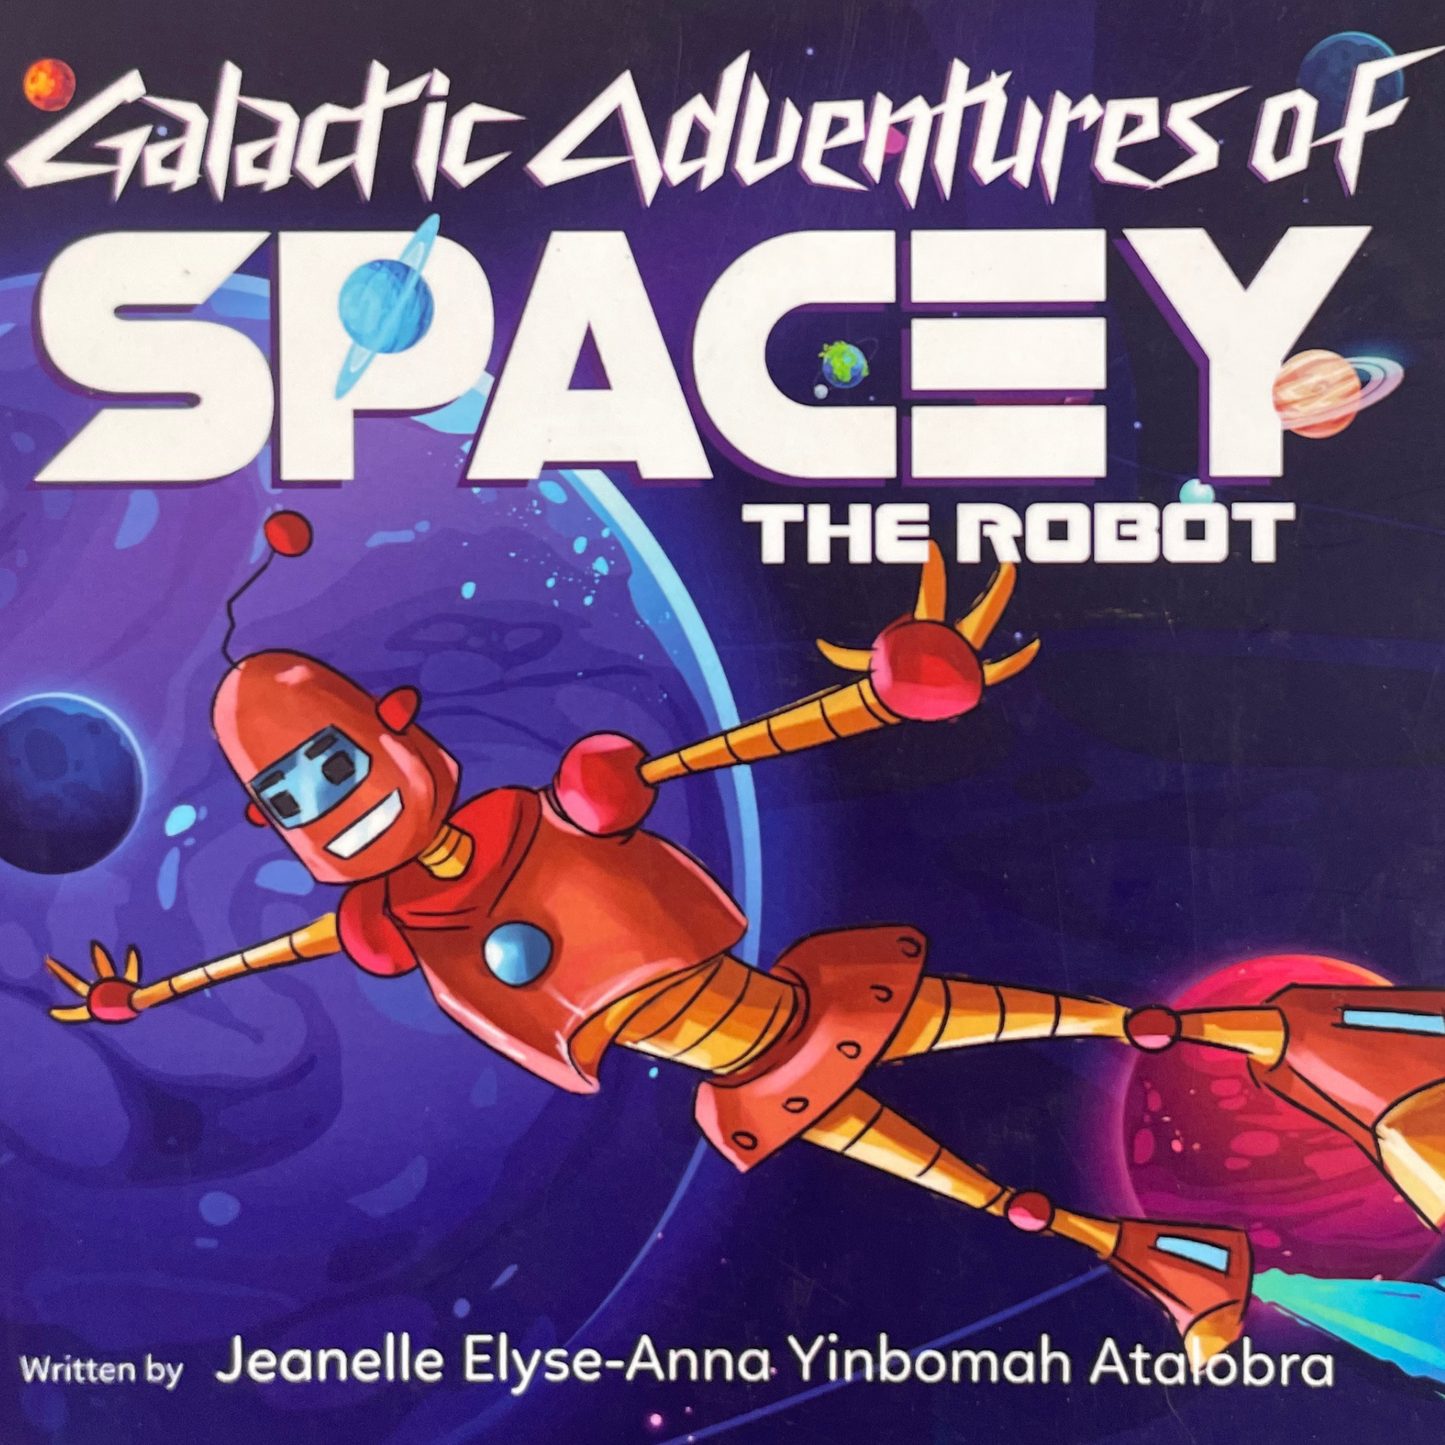 Galactic Adventure of Spacey the robot